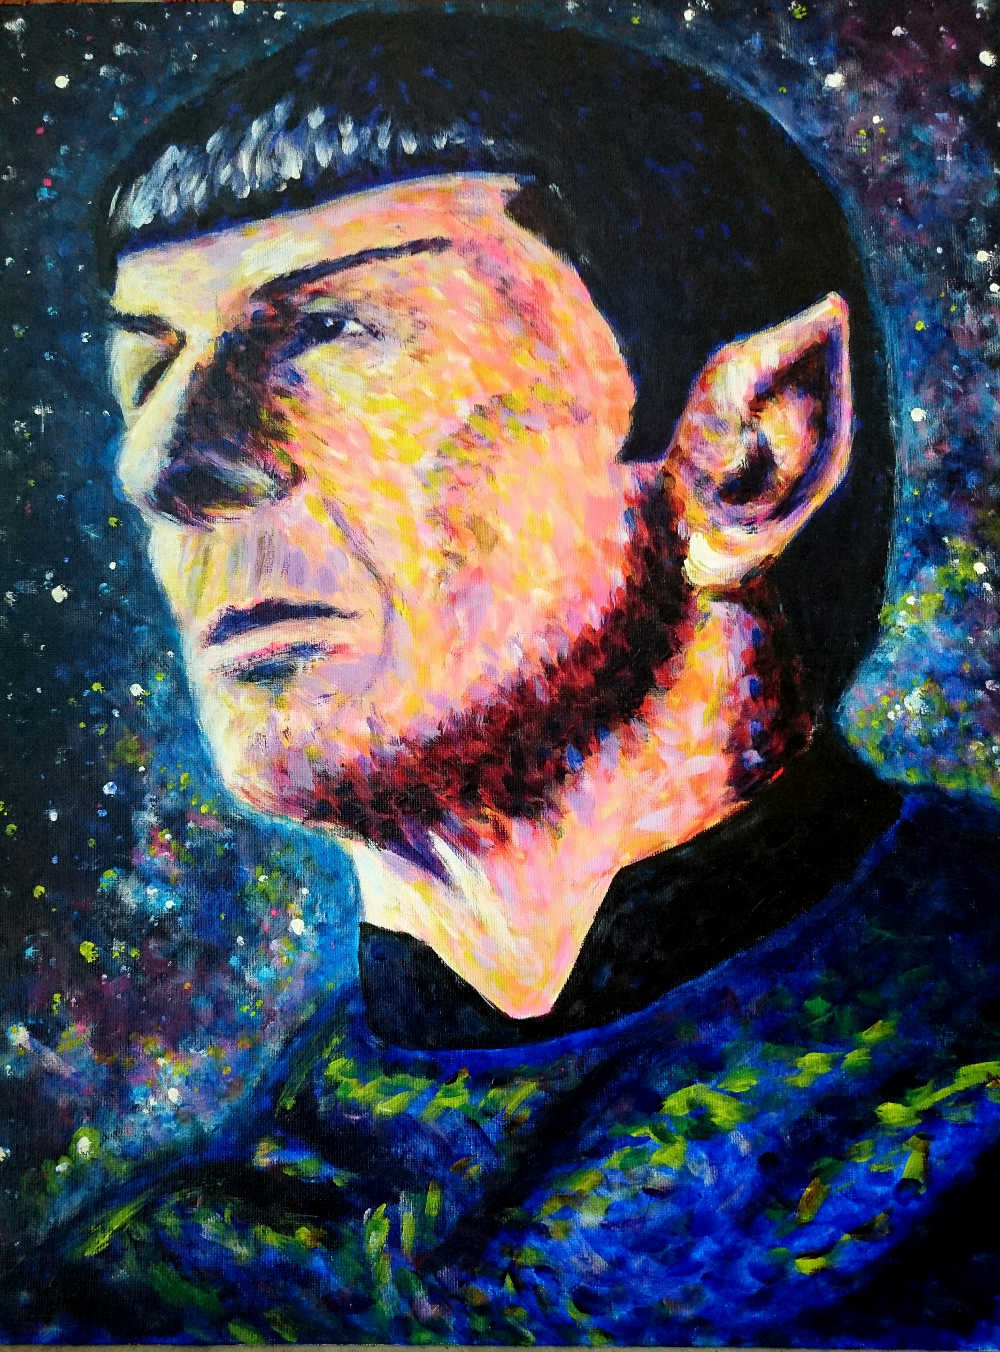 A painting of Spock from Star Trek